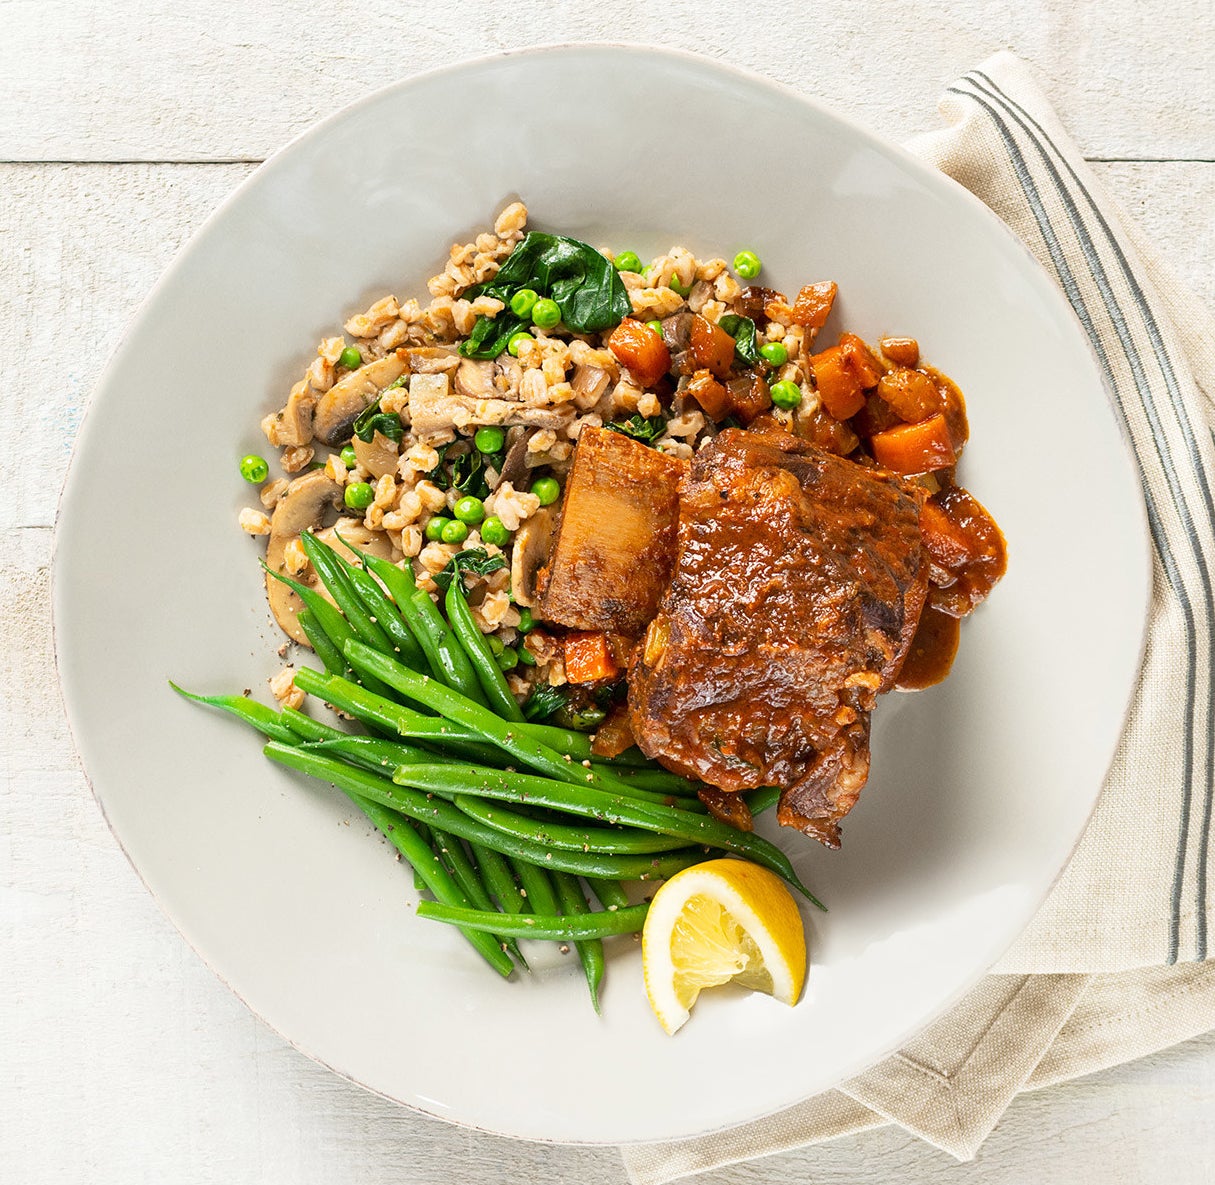 A top down view of the braised short ribs nestled on a bed of farro pilaf and steamed green beans